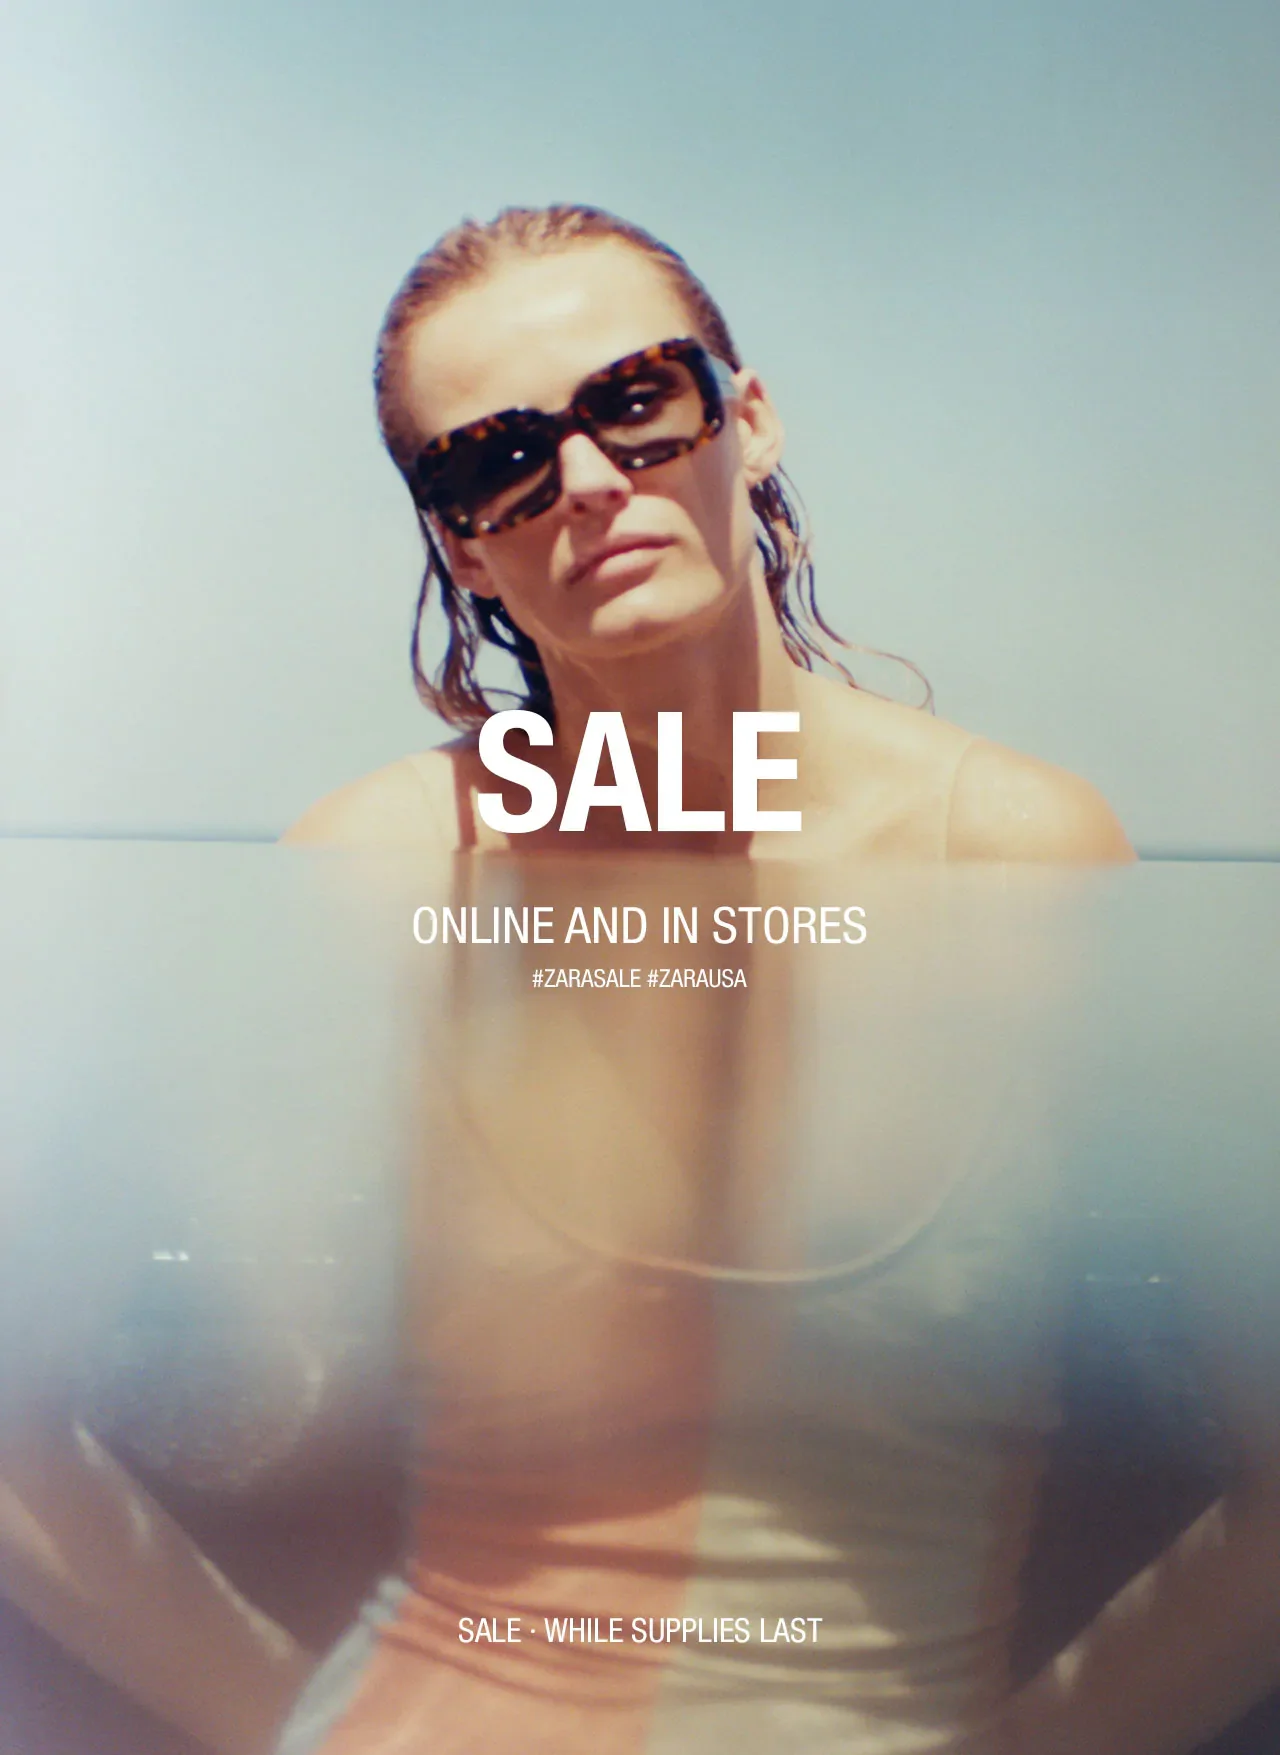 SALE now in stores and zara.com 